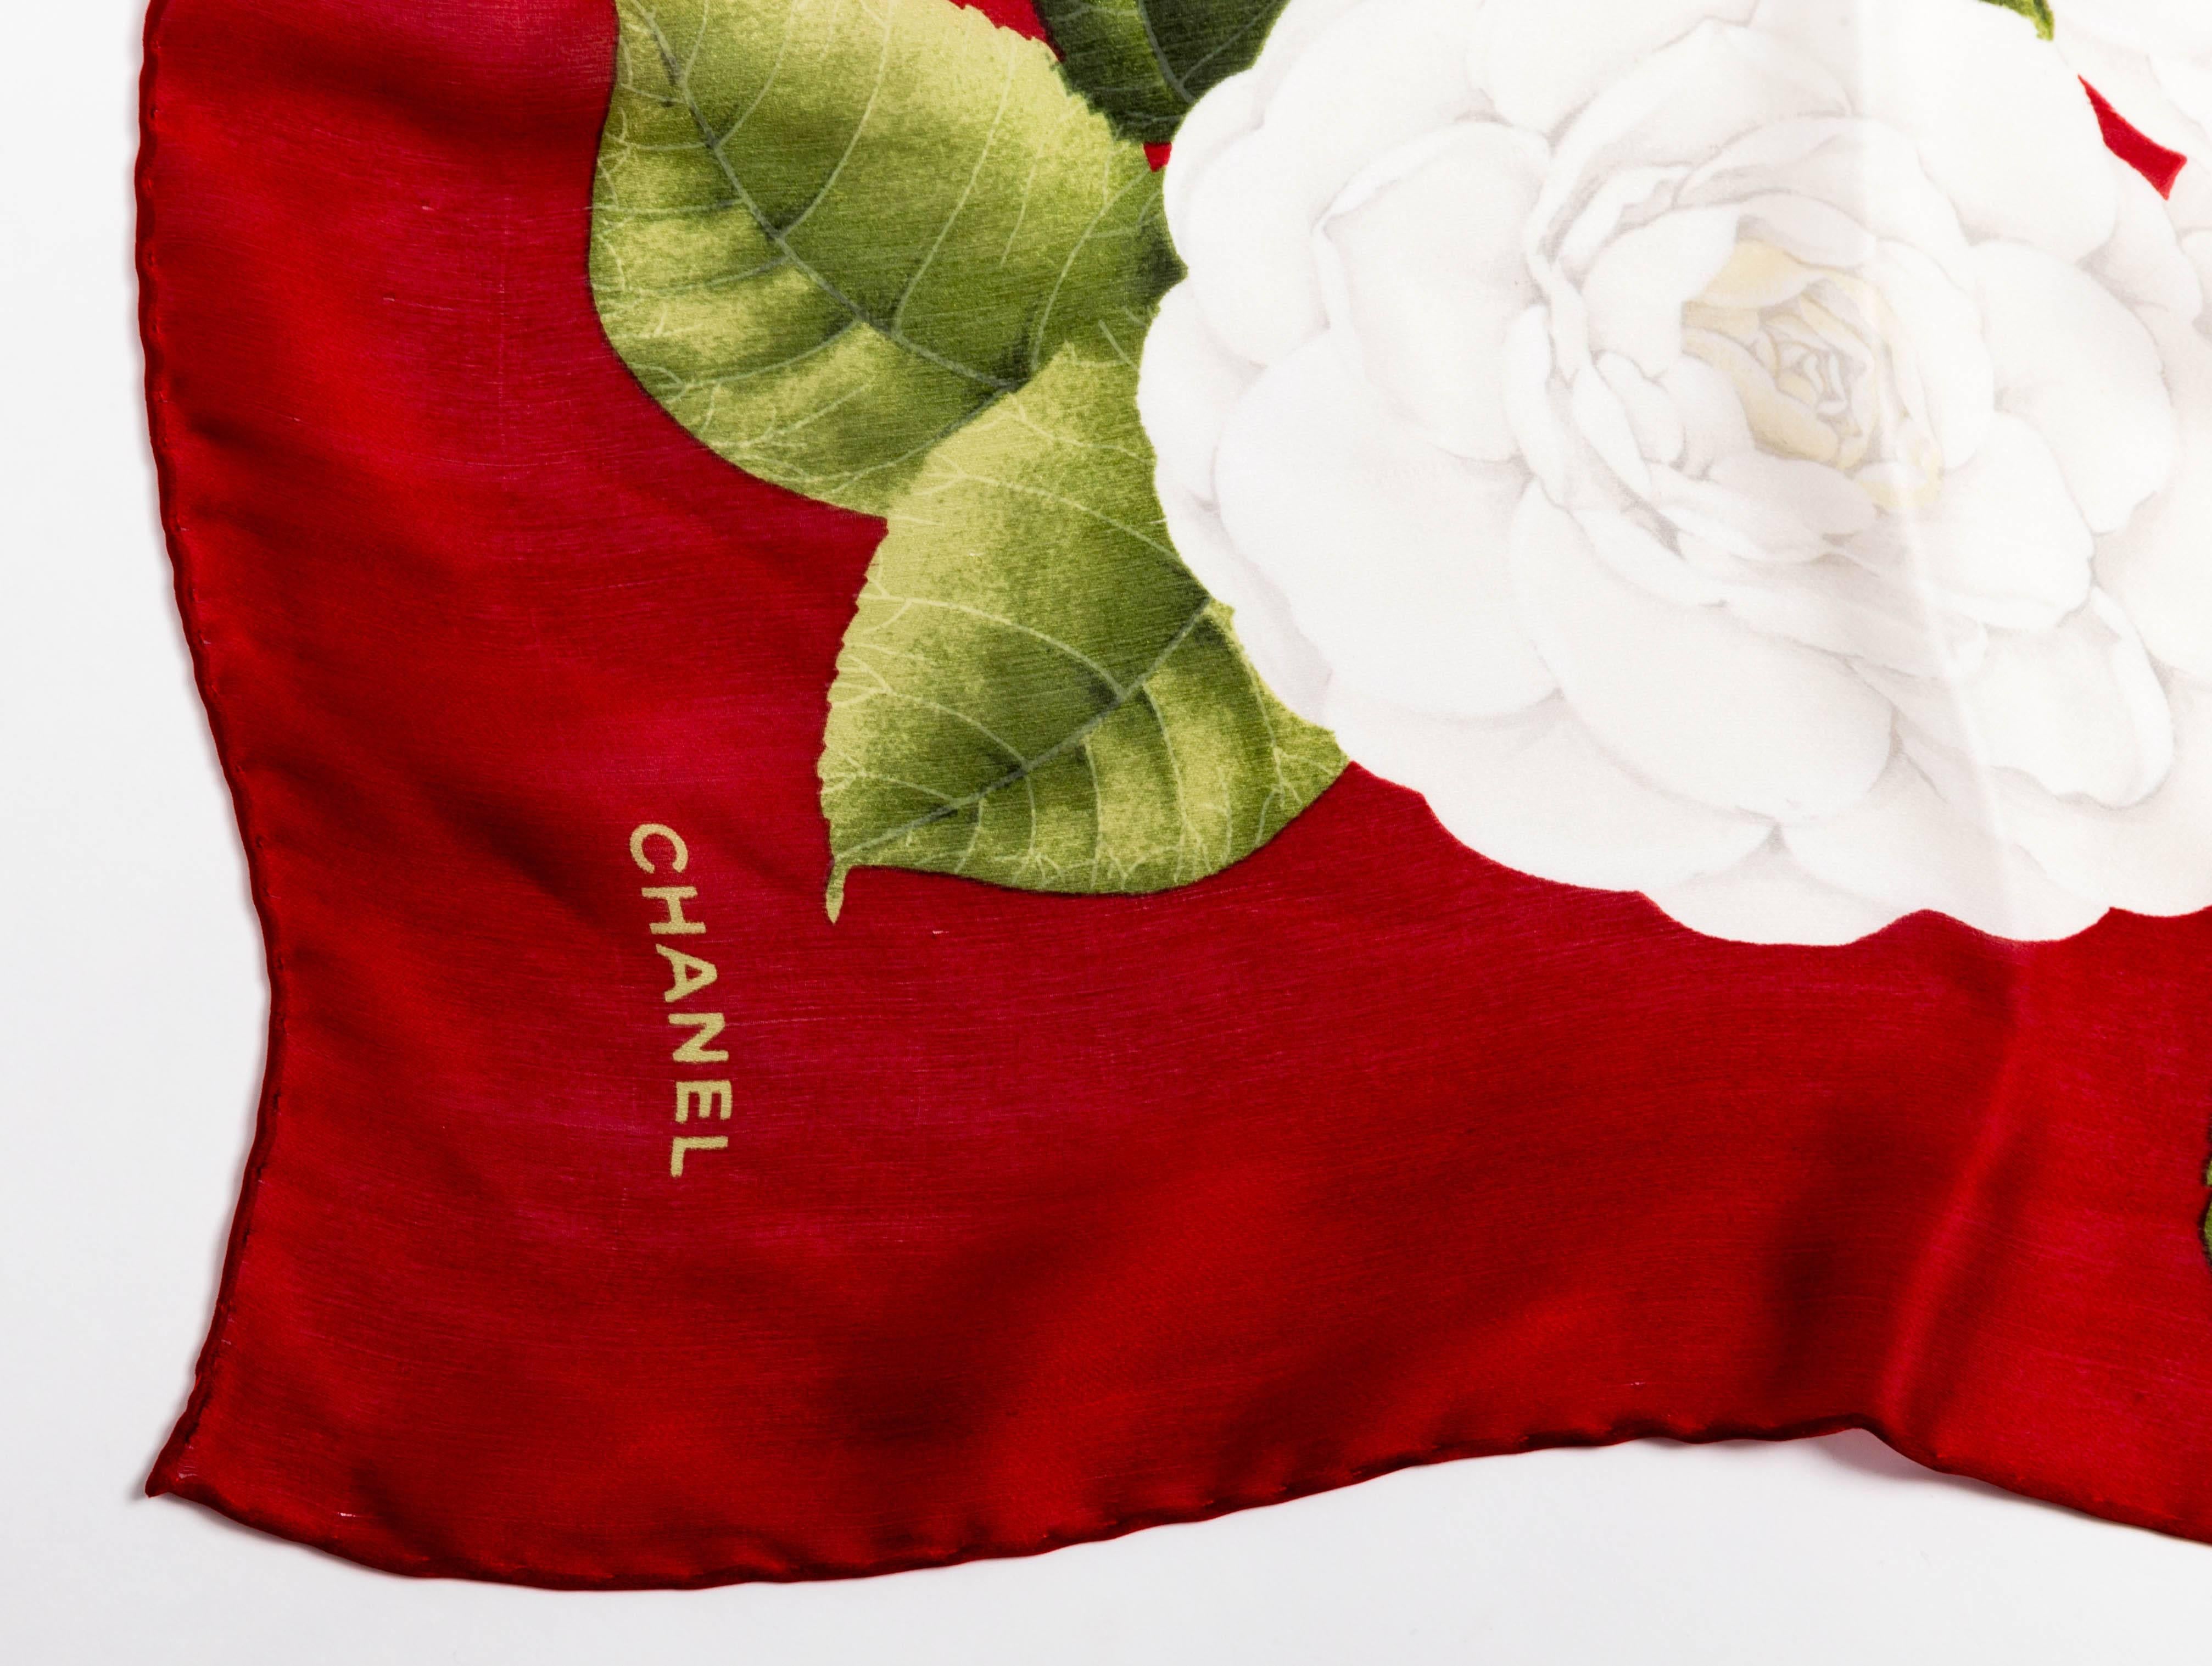 Very pretty Chanel silk scarf with white camellia flowers on a red background. Green leaves accent the beautiful camellias. 